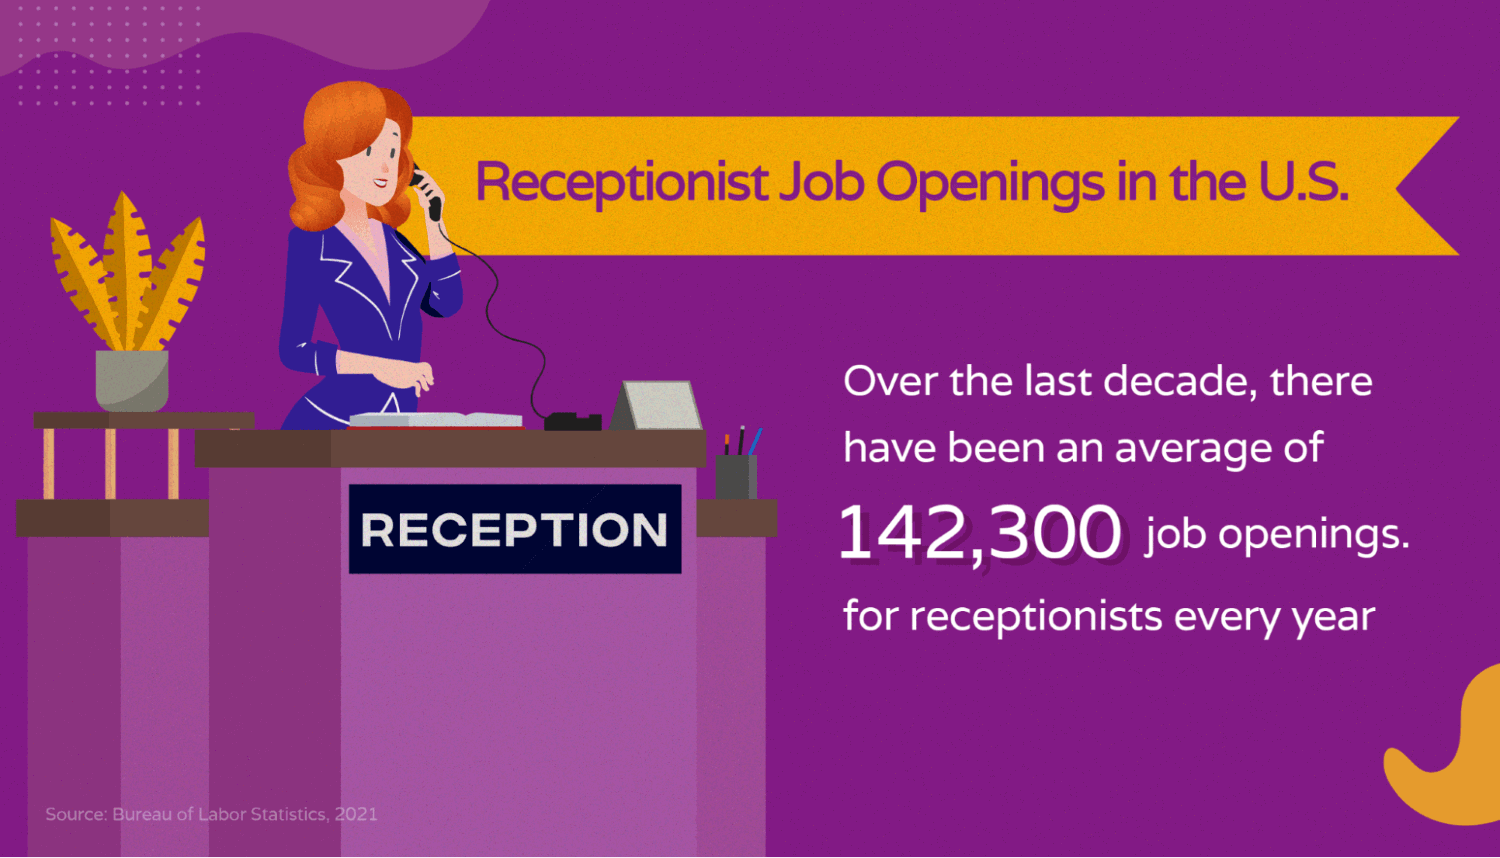 Number of receptionist job openings in the U.S.